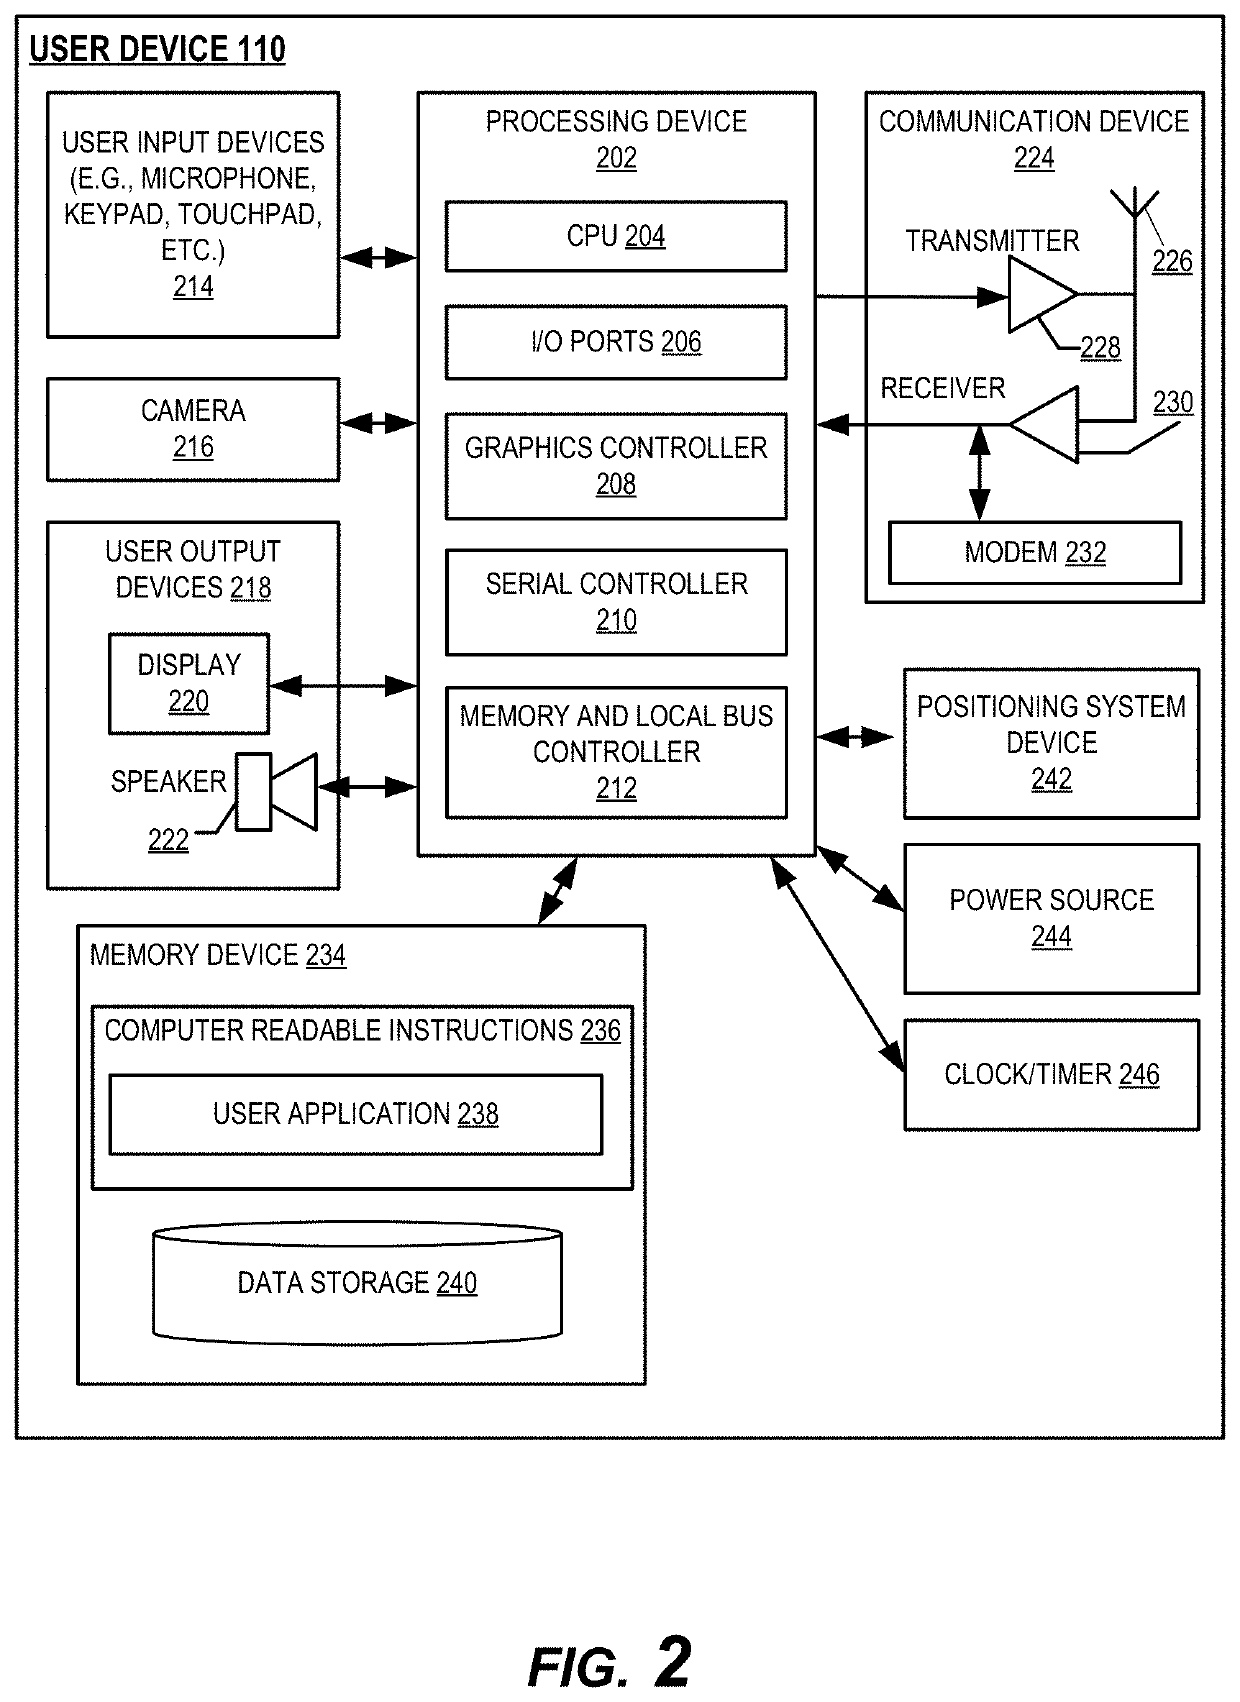 Geographic mapping system for resource positioning optimization within an environment